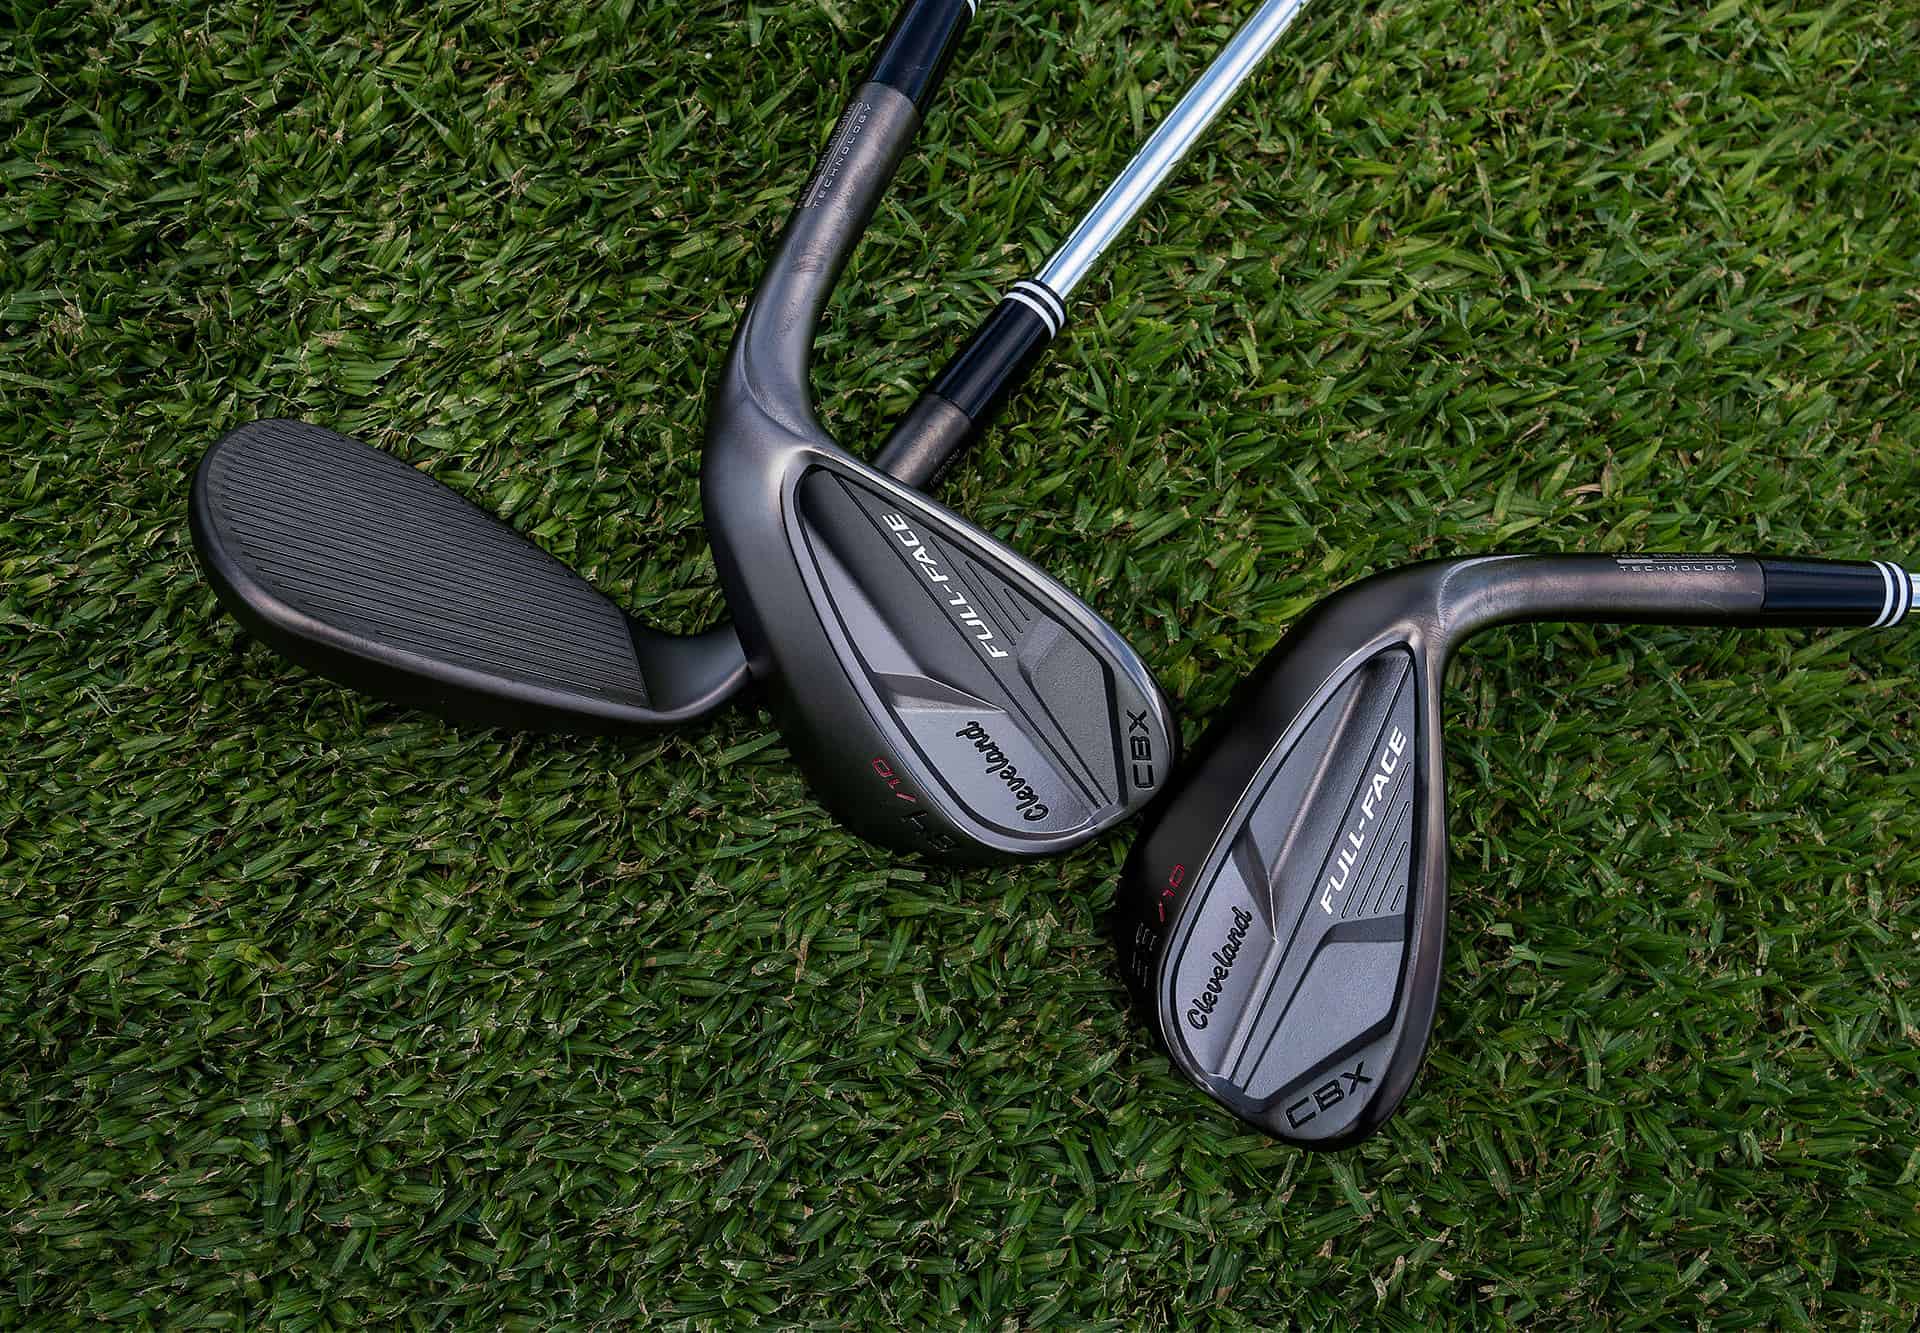 Buying Guides: Best Cleveland wedges